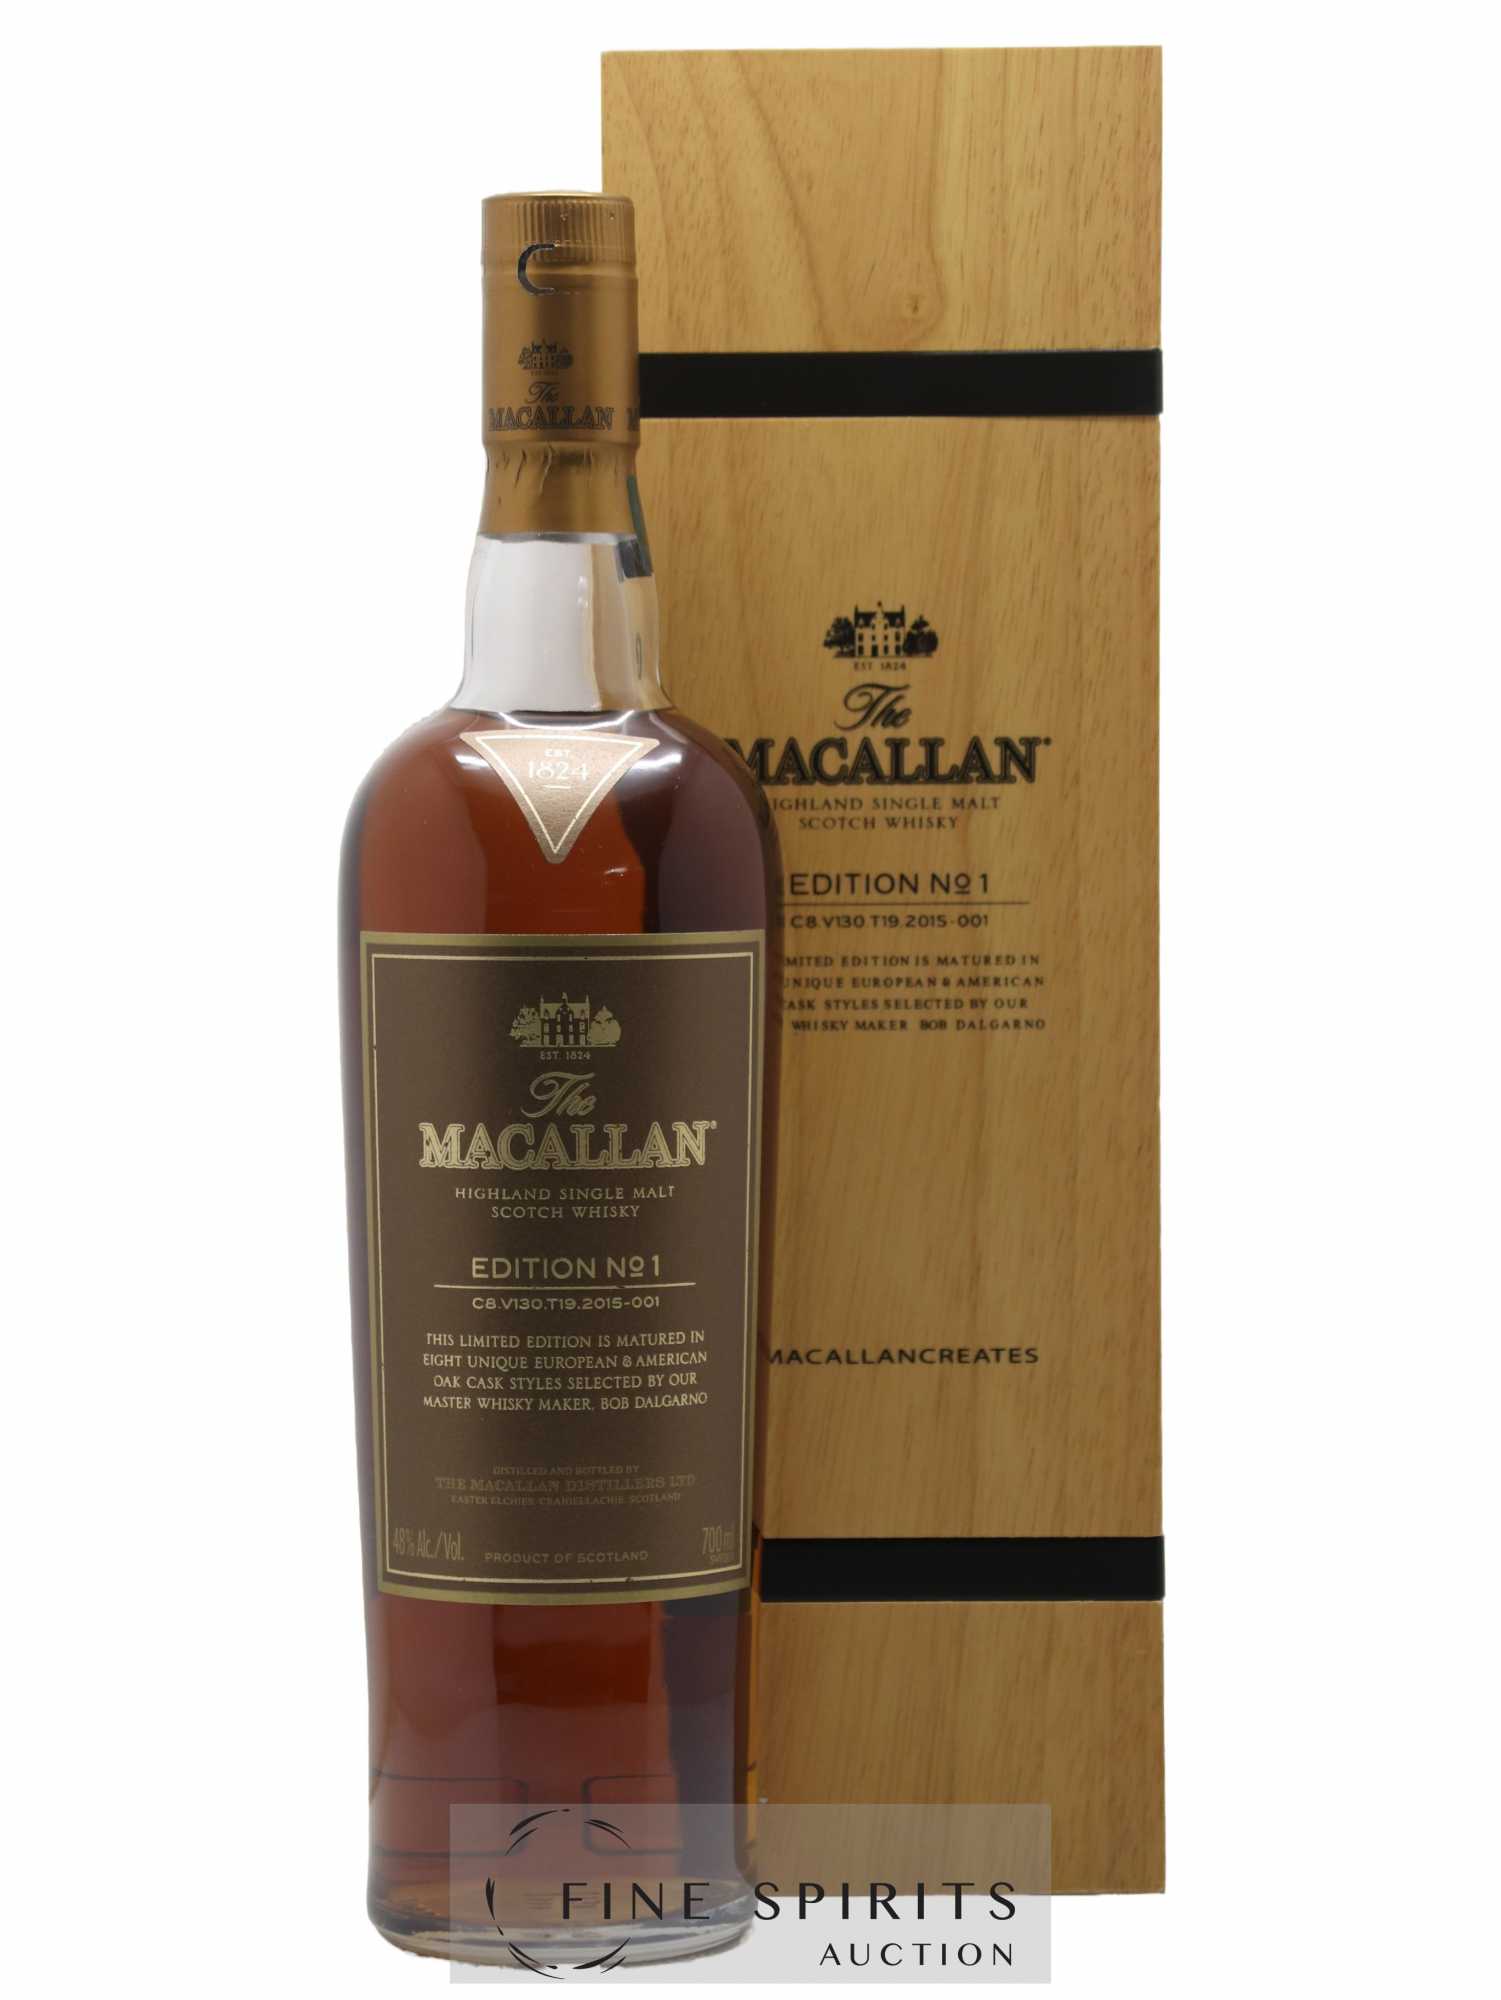 Macallan (The) Of. Edition n°1 C8.V130.T19.2015-001 Limited Edition 